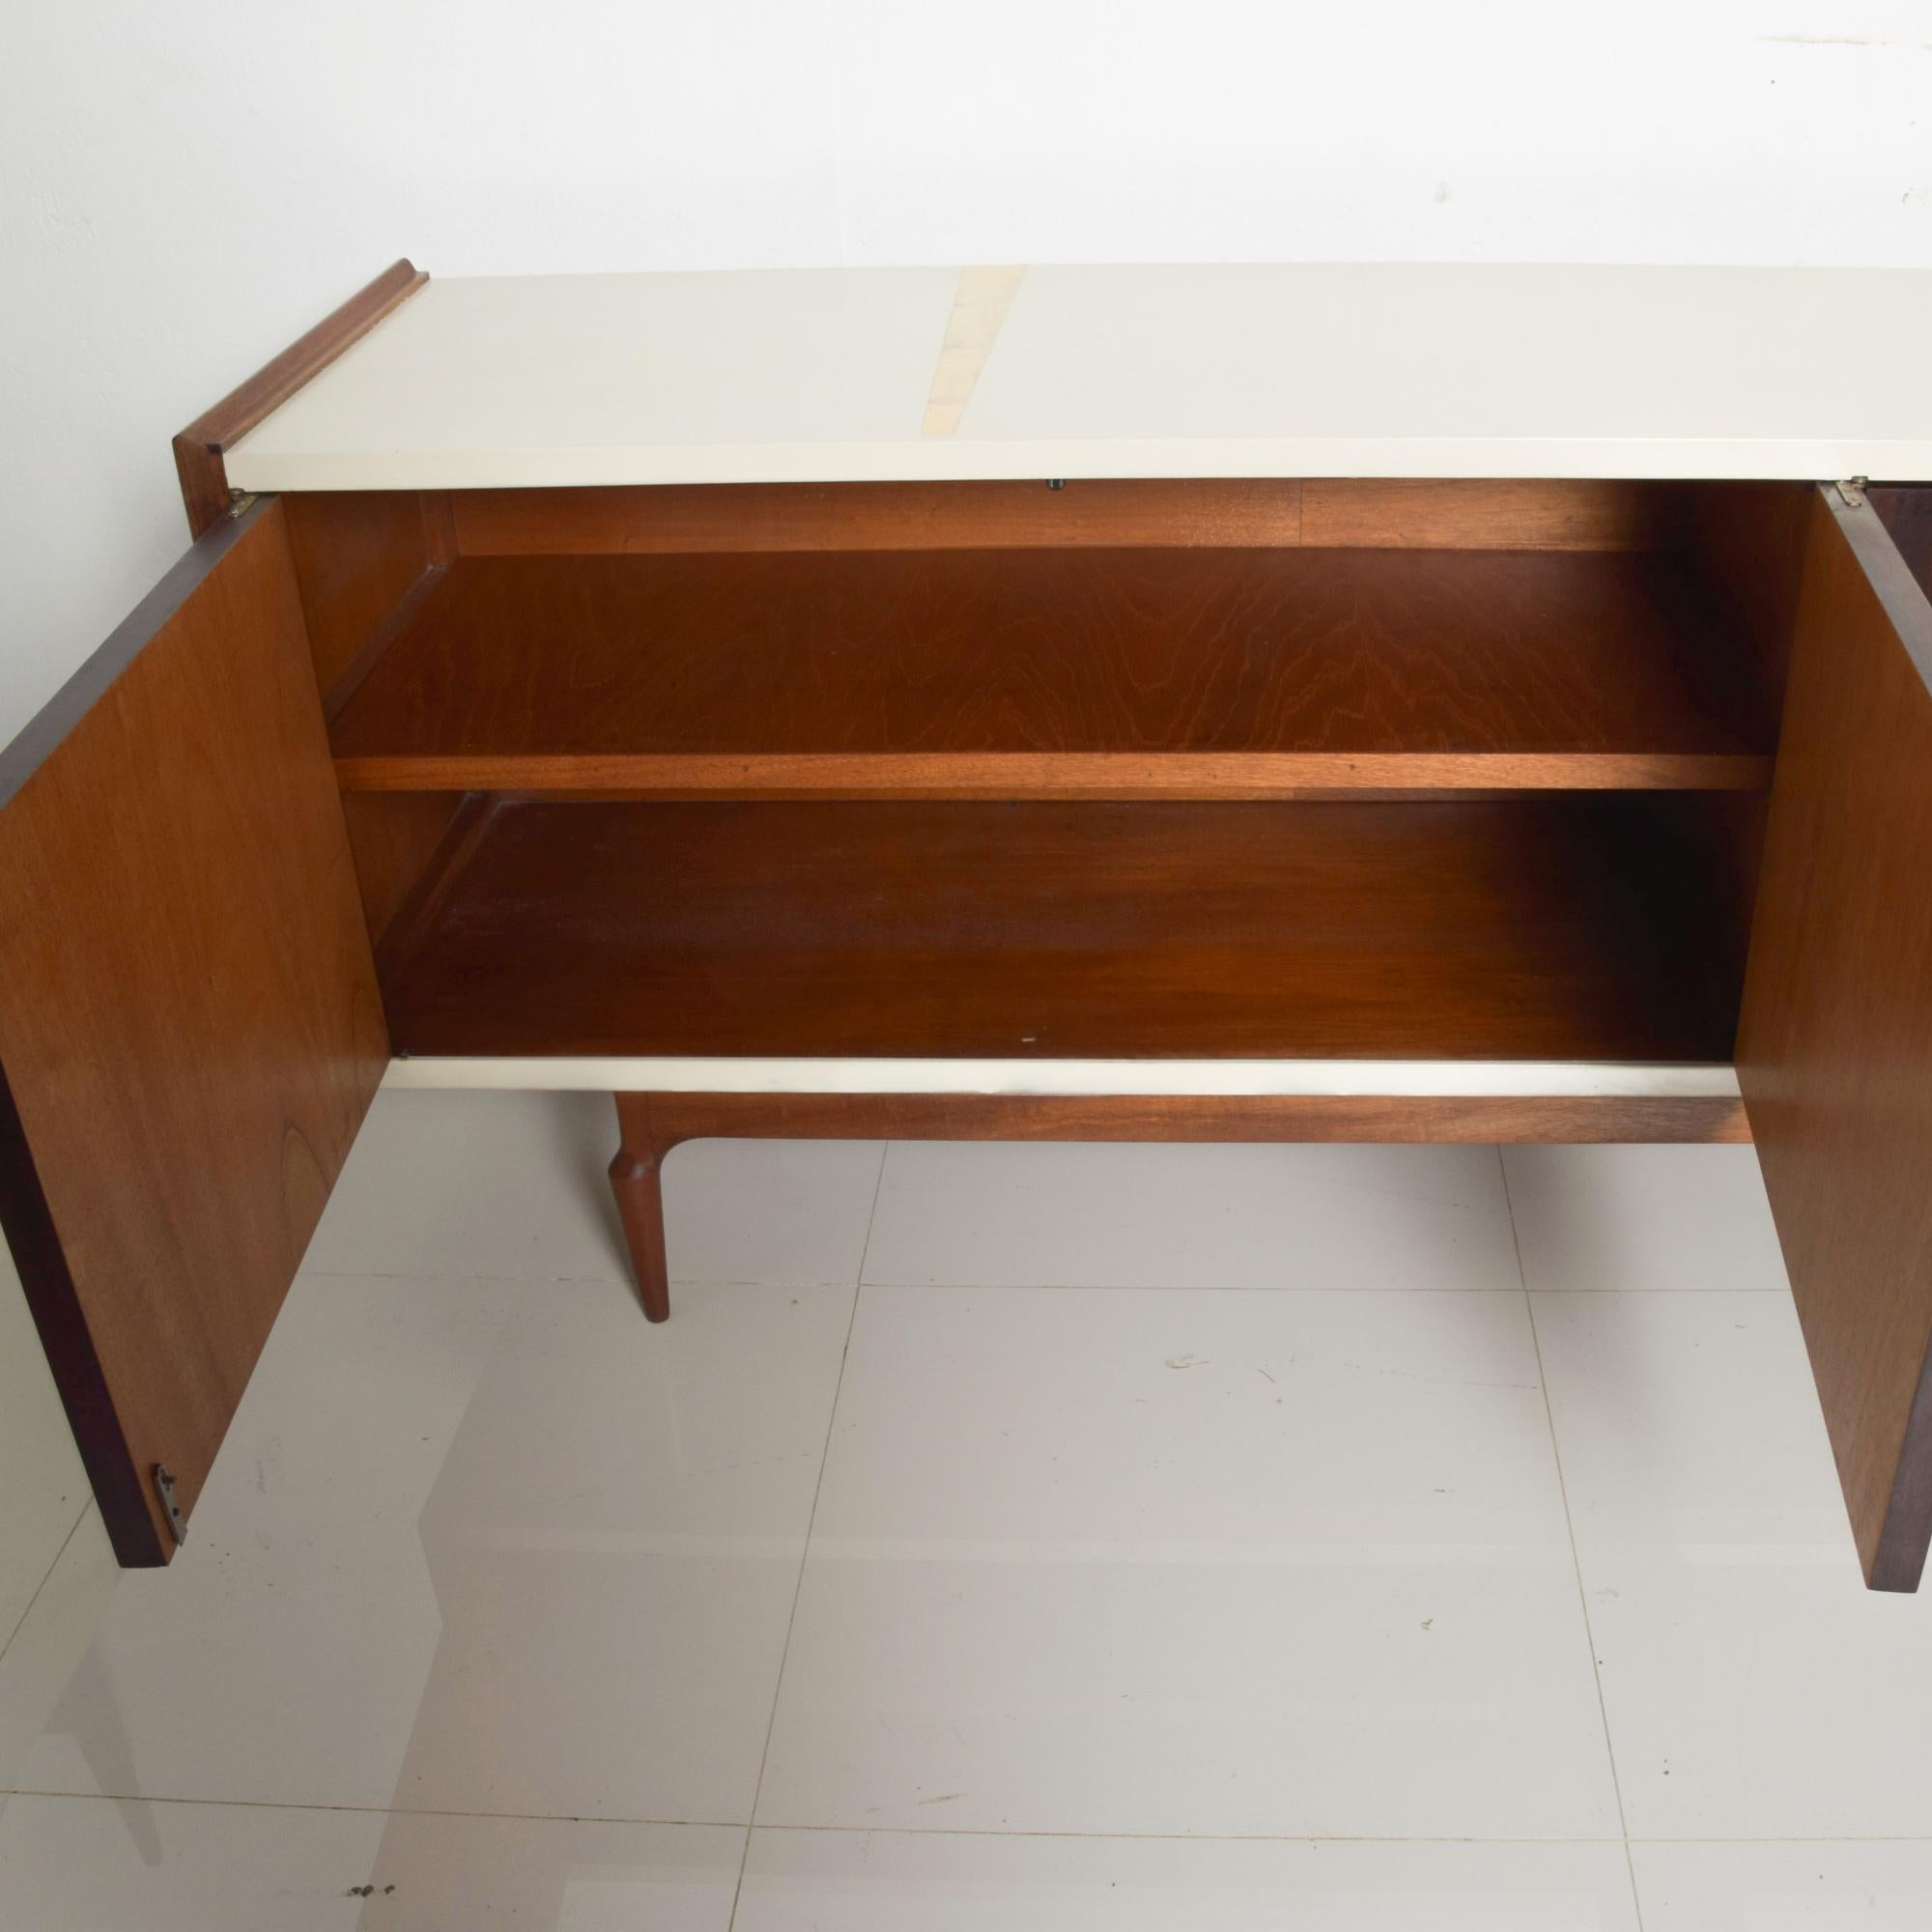 1960s Magnificently Long Credenza Two Tone Lacquer & Wood Monterrey, Mexico For Sale 3